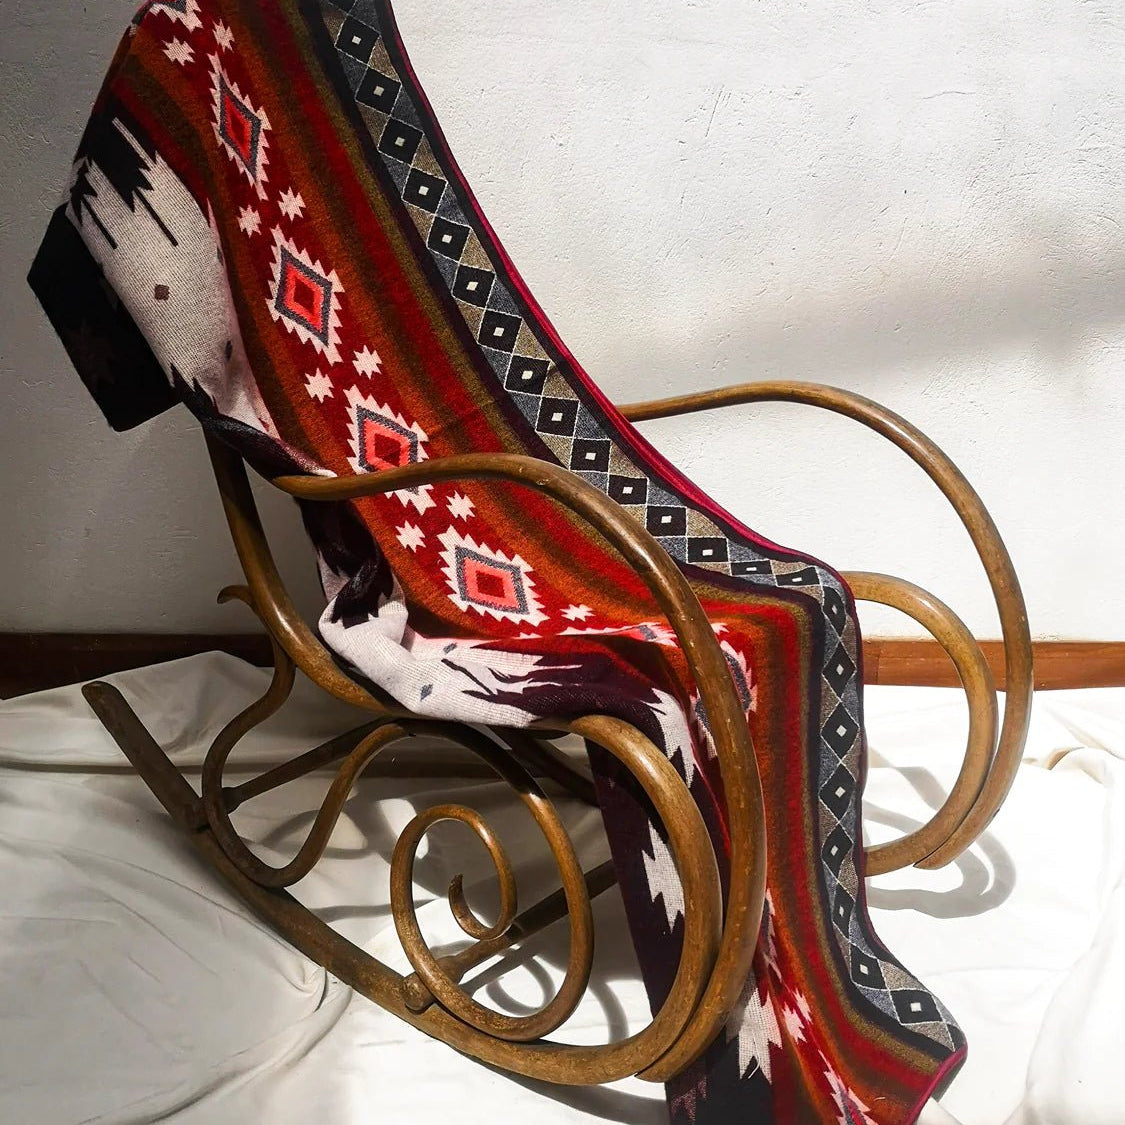 Frontera Reversible Throw Blanket draped over a classic wooden rocking chair.